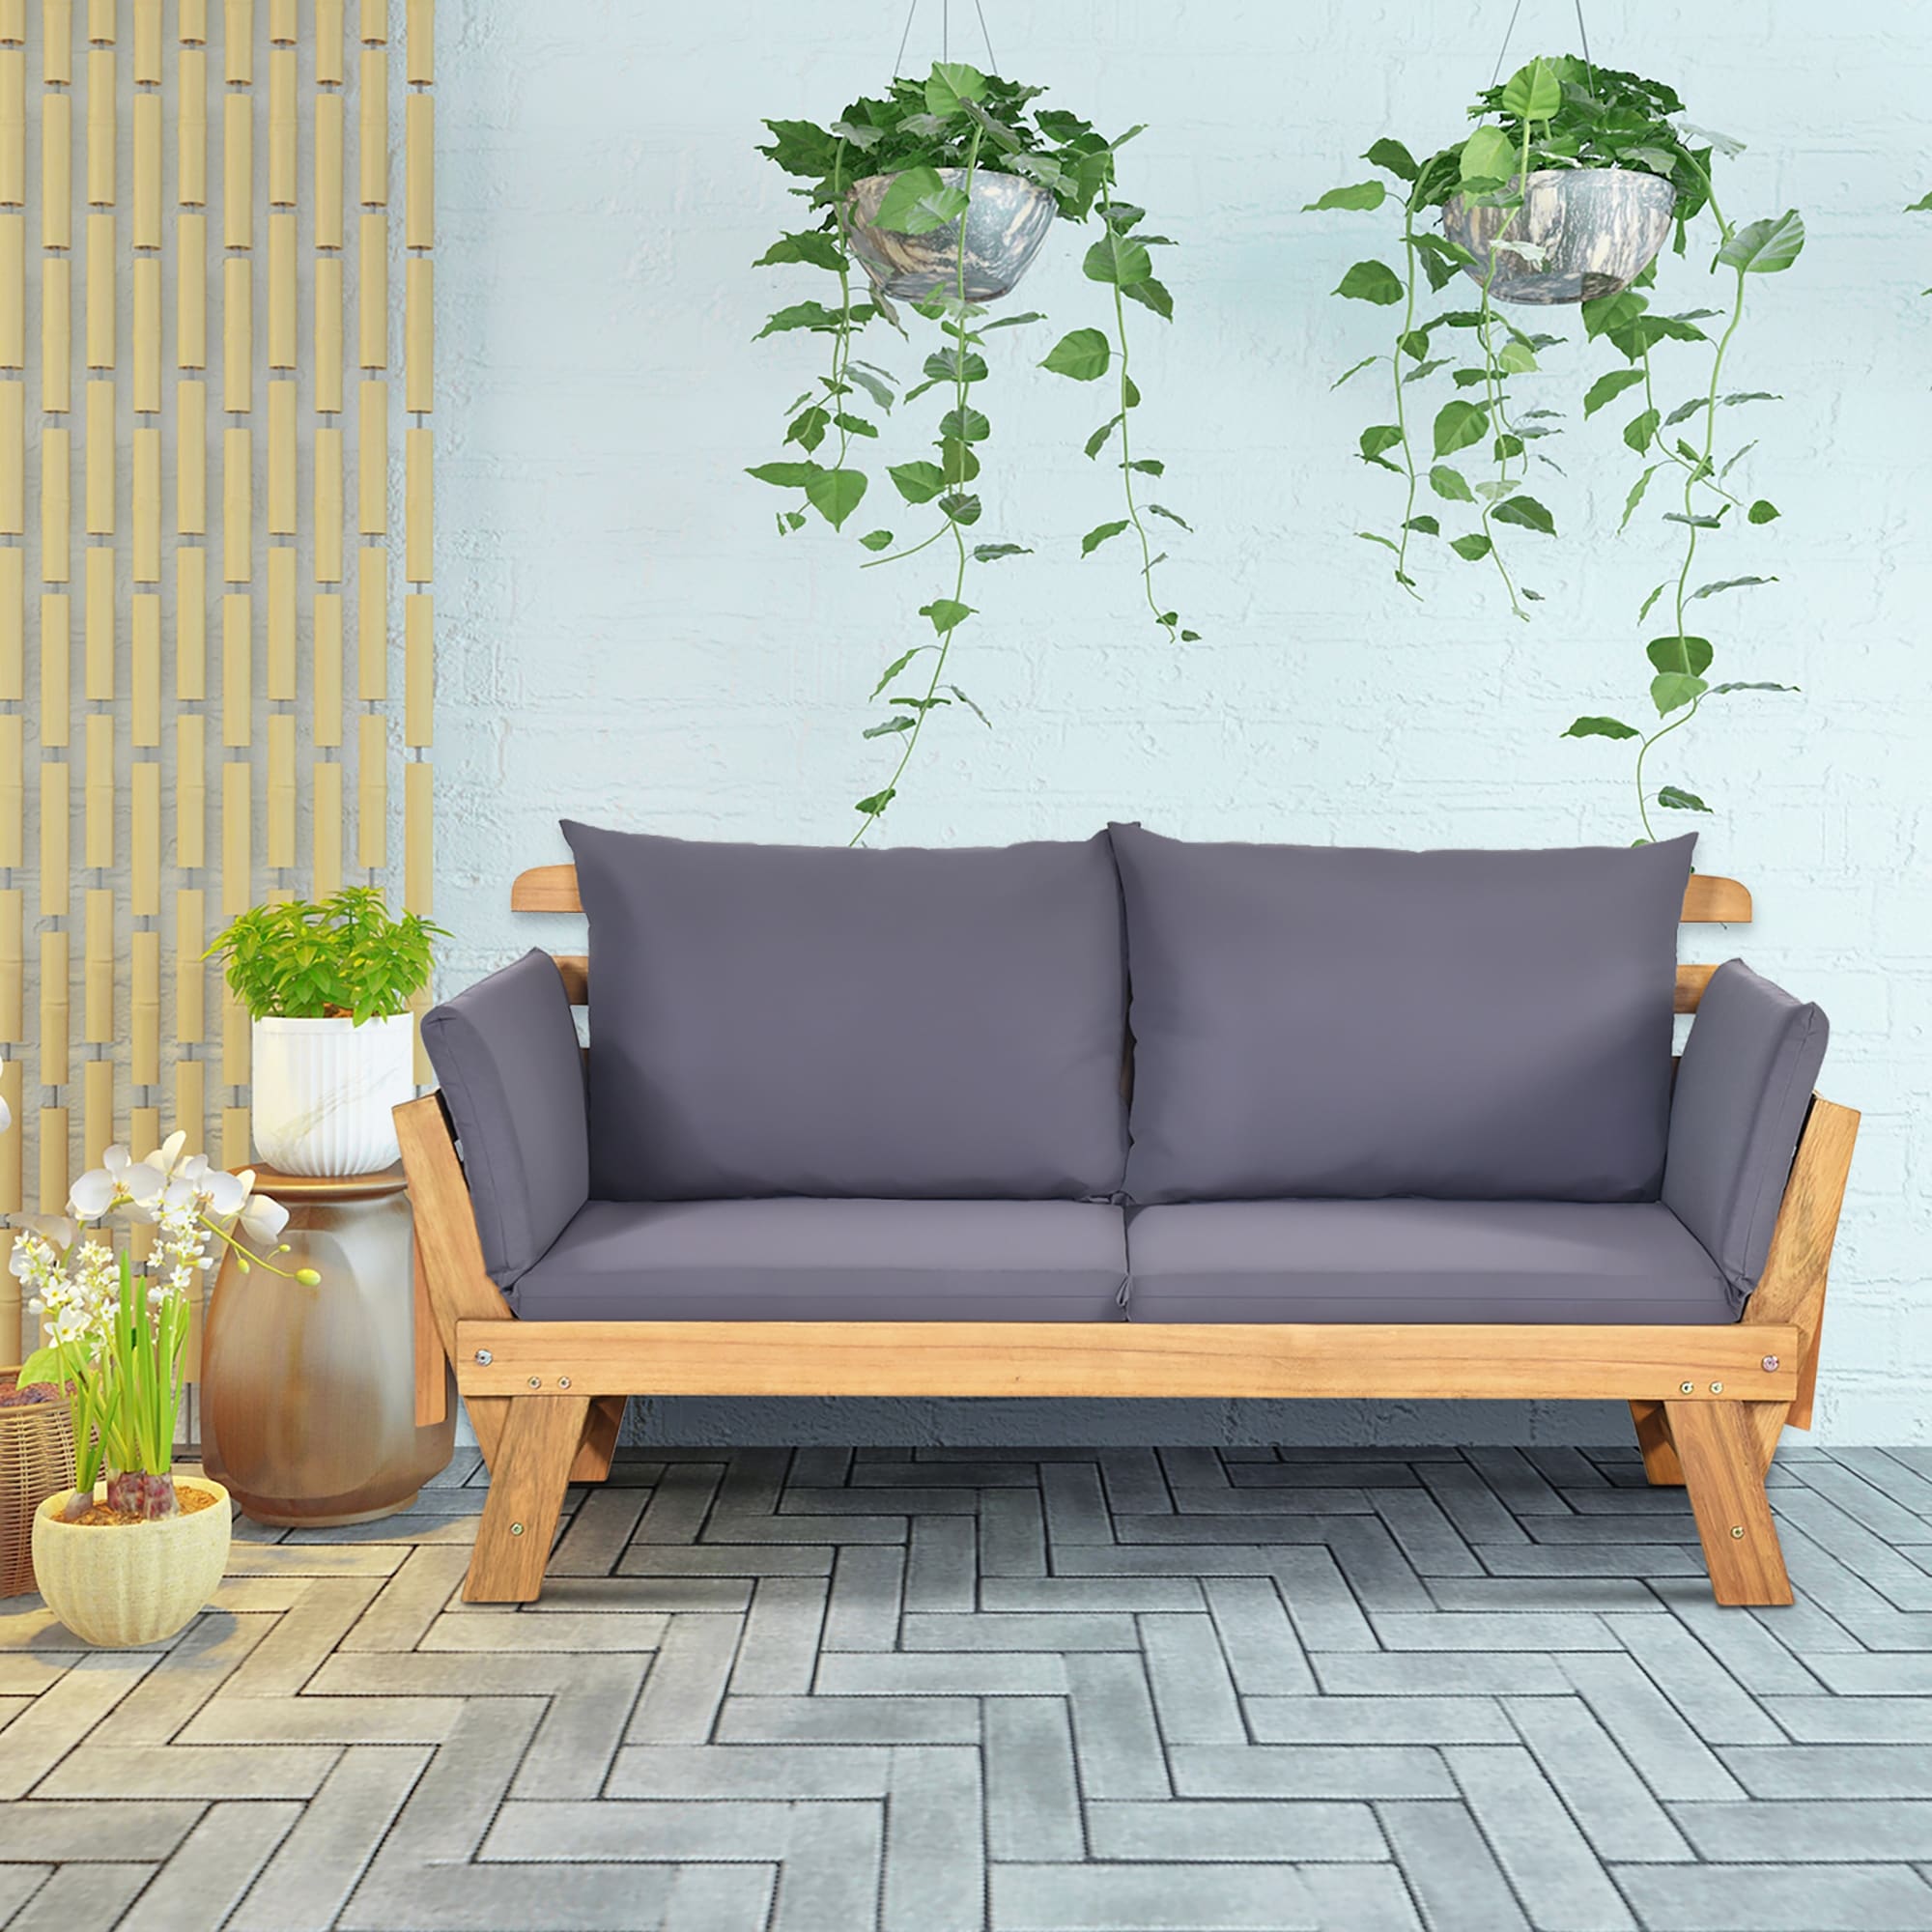 Pracht minimum Oppervlakte Gymax Adjustable Patio Sofa Daybed Acacia Wood Furniture w/ Cushion - See  Details - Overstock - 34383515